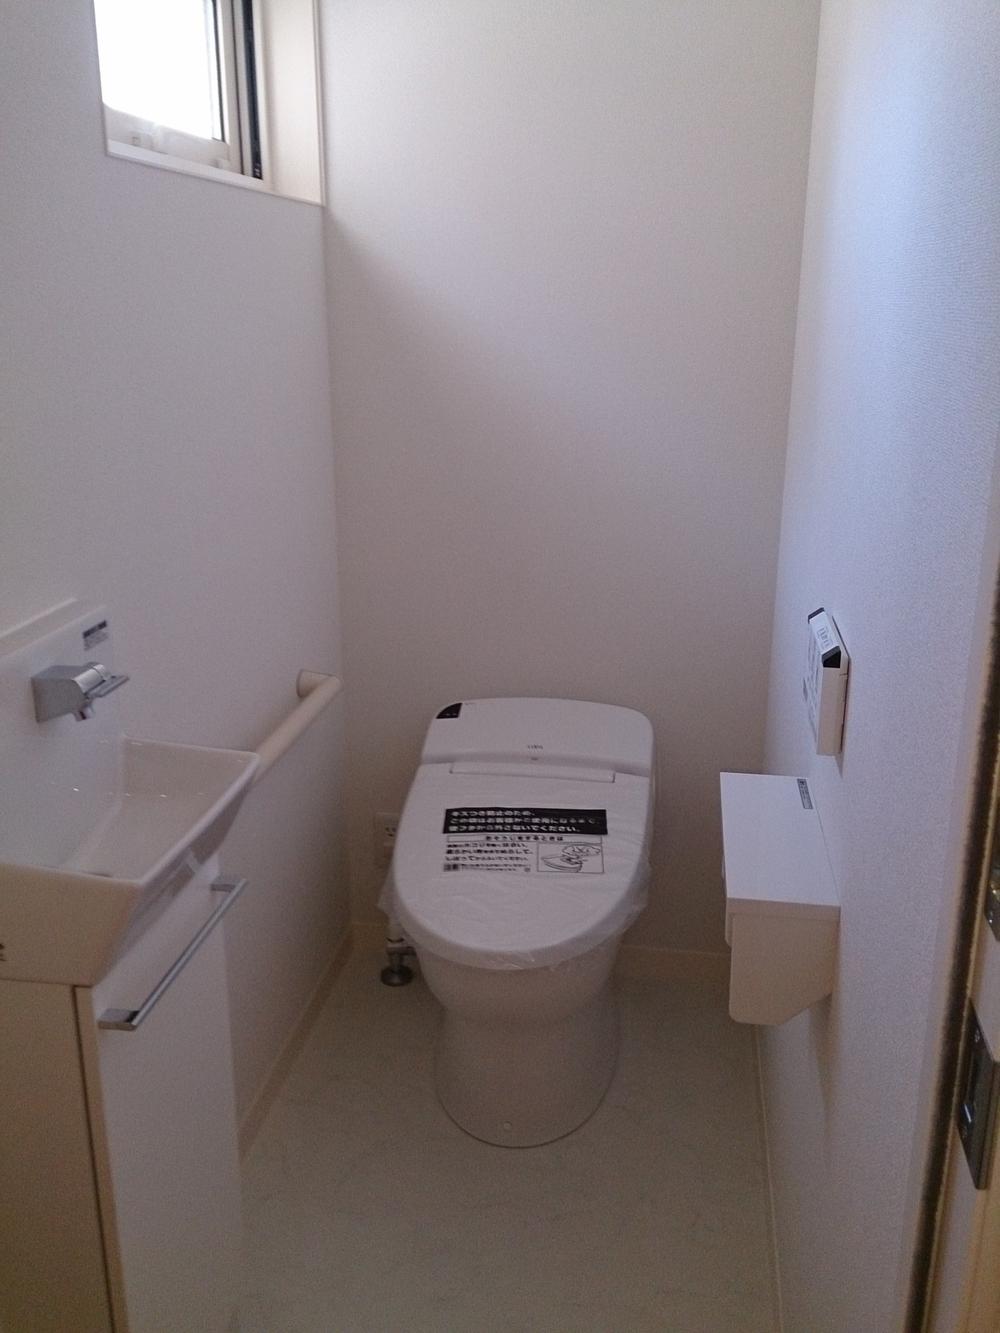 Toilet. Brightly, Unified in a clean white